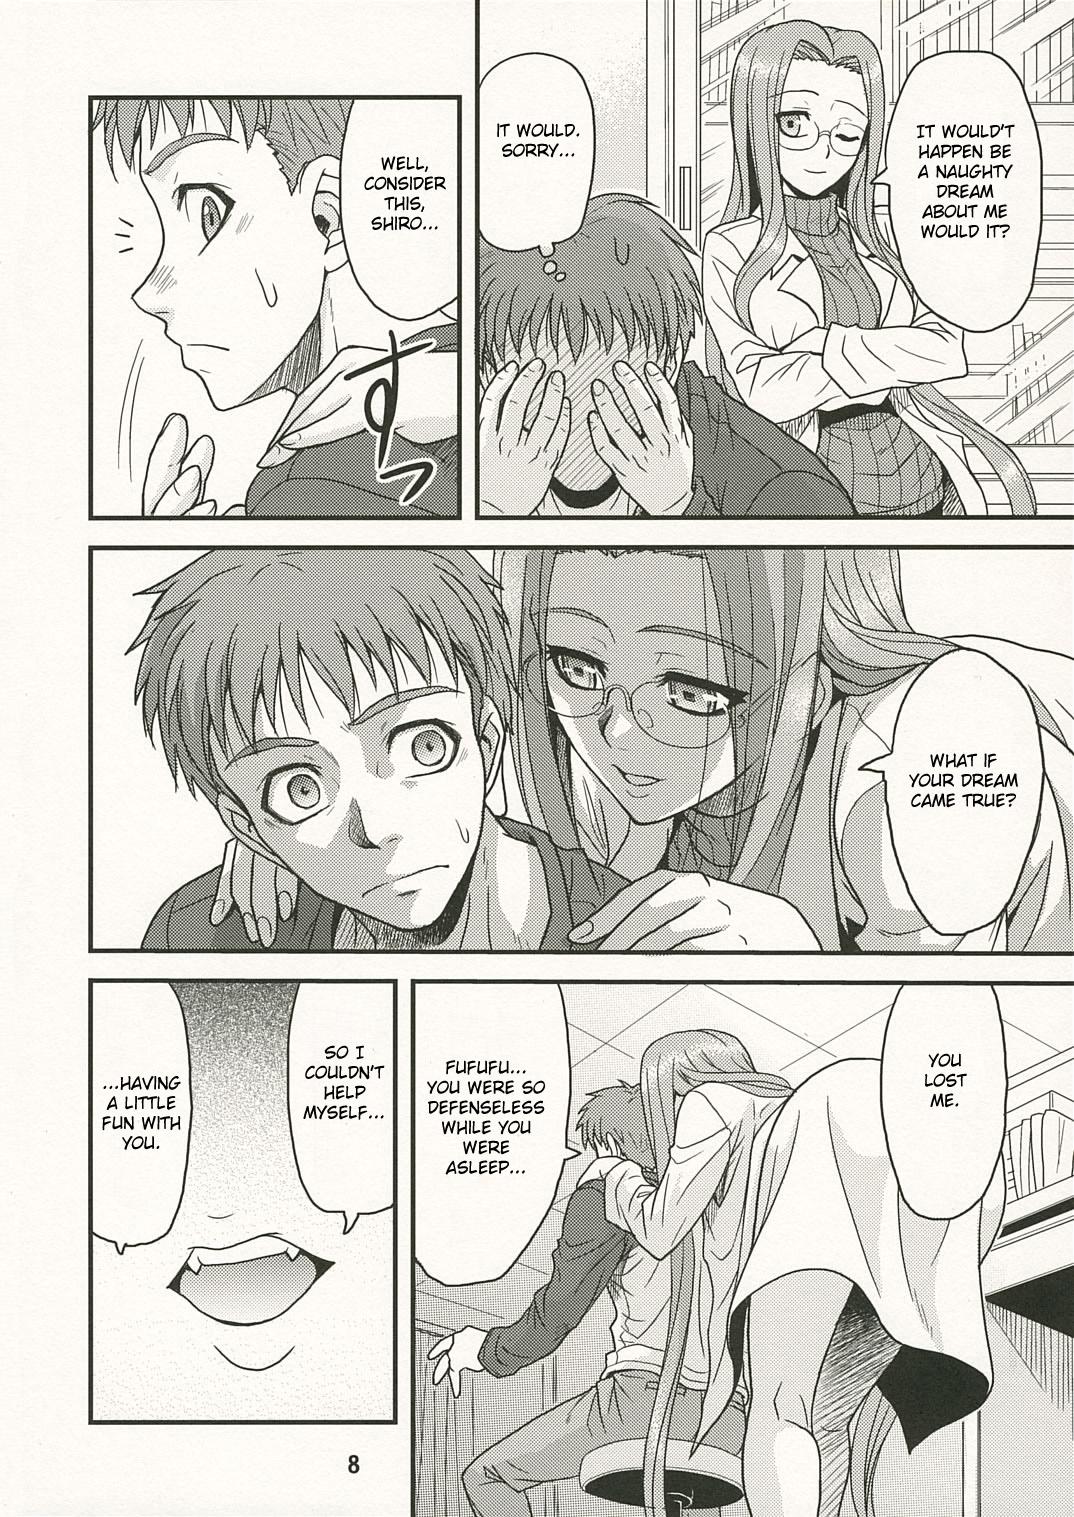 Reverse Ride on Dream - Fate hollow ataraxia Gagging - Page 7